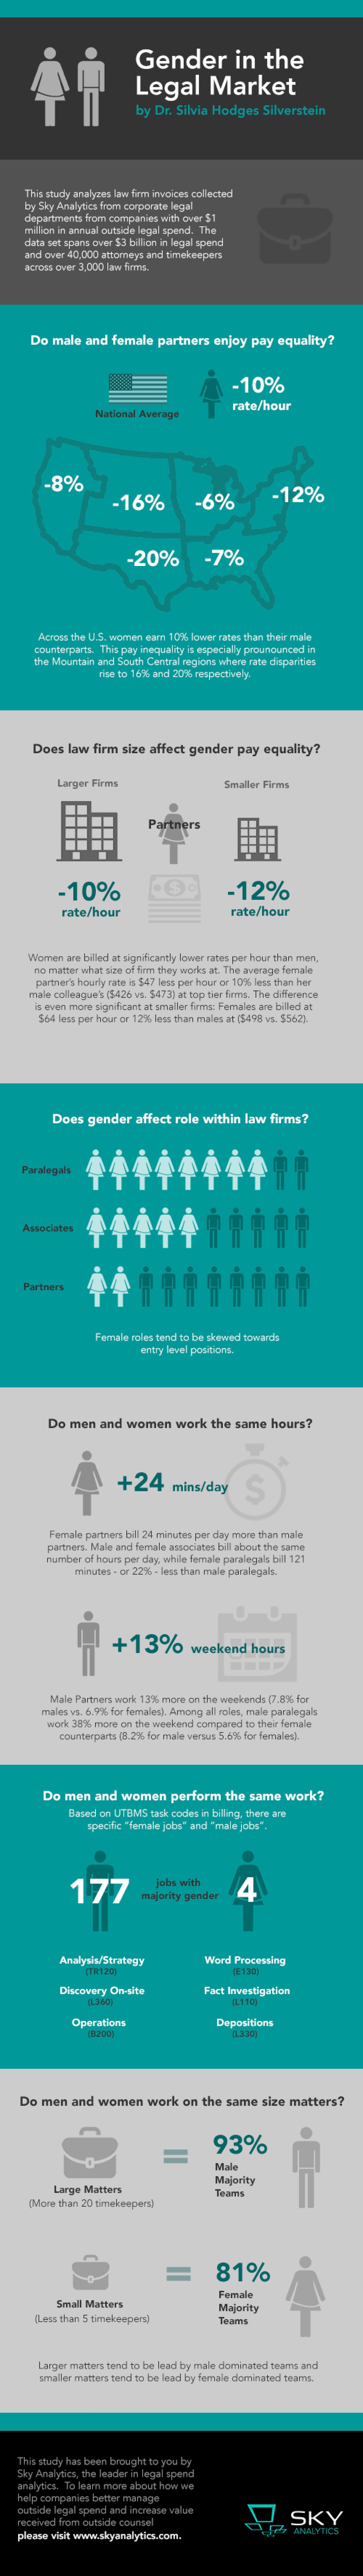 Gender Inequality in the Legal Market Infographic